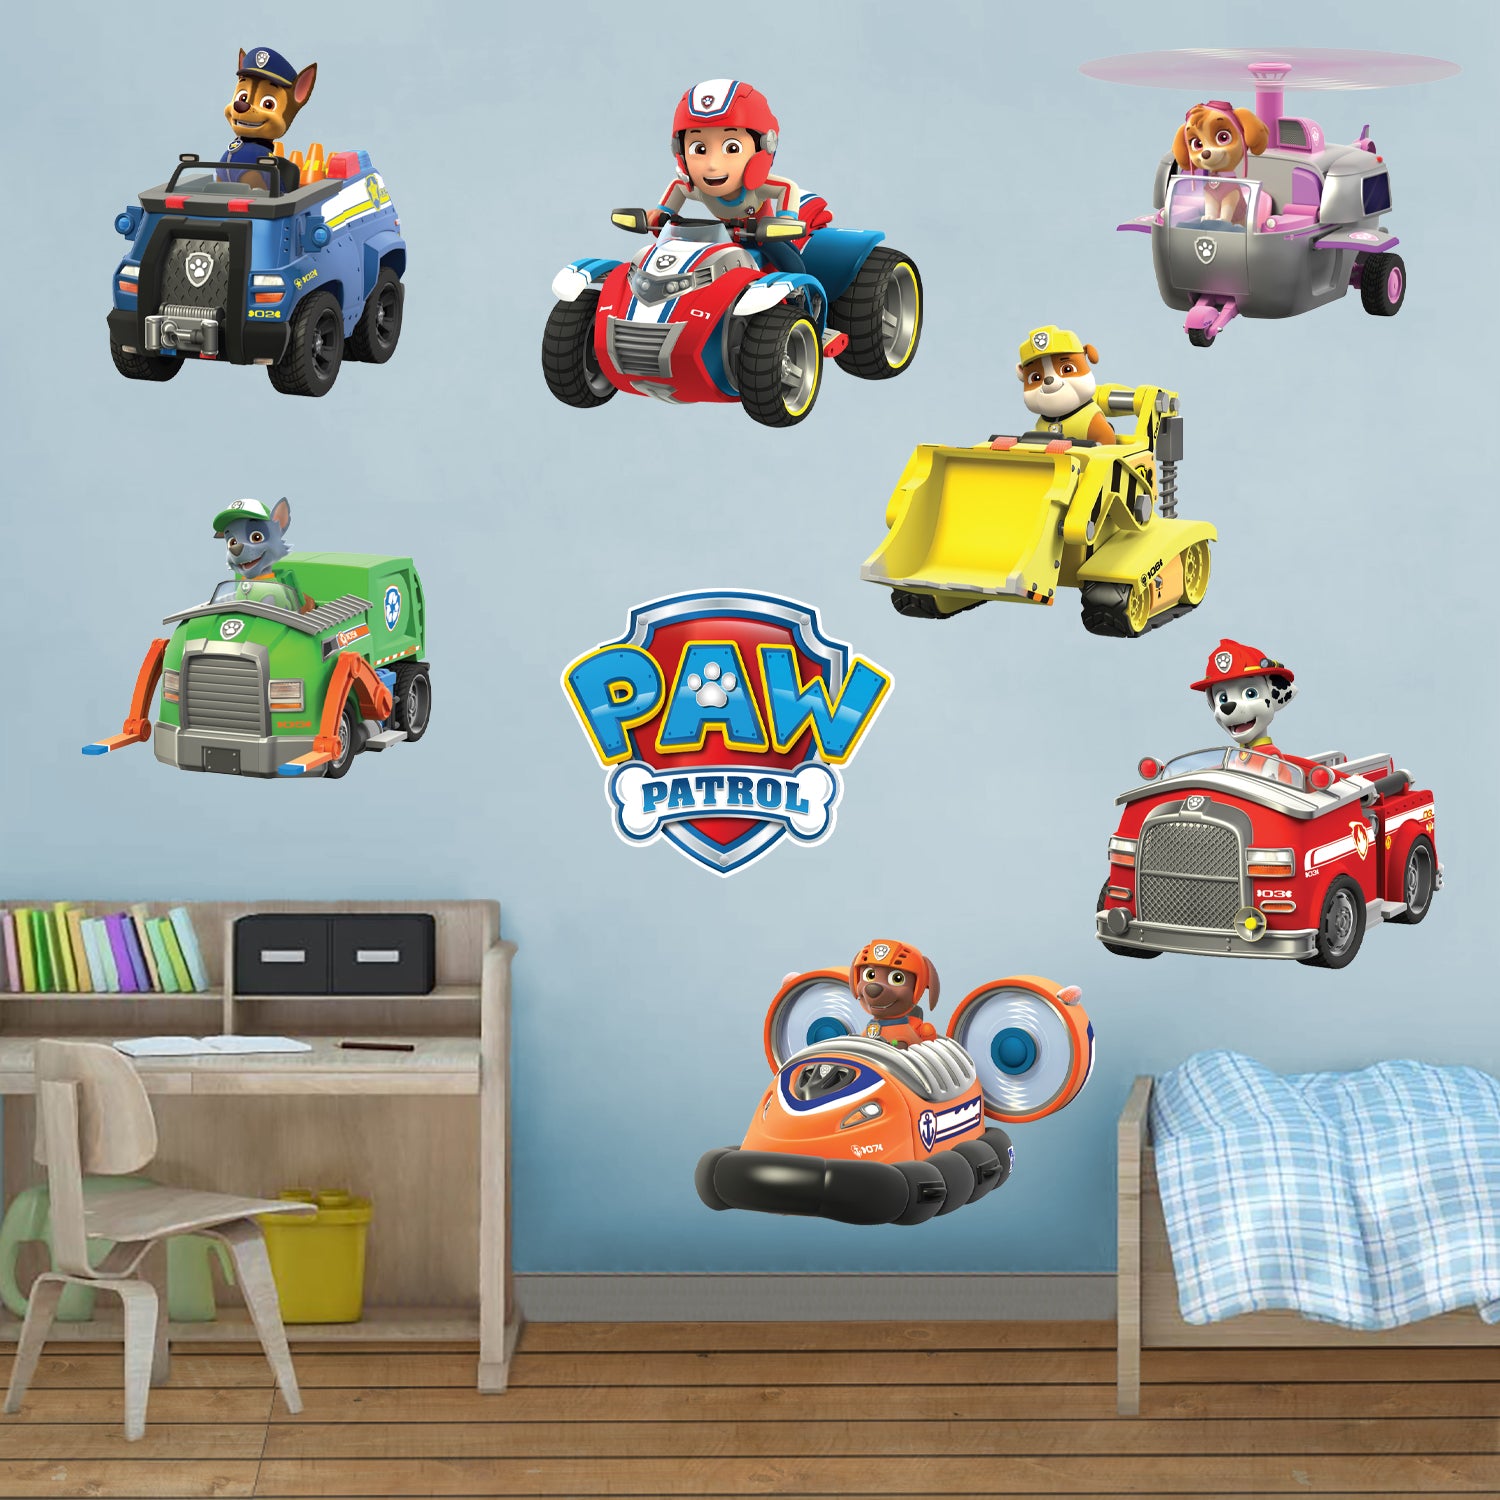 Paw Patrol: Rubble RealBig - Officially Licensed Nickelodeon Removable –  Fathead